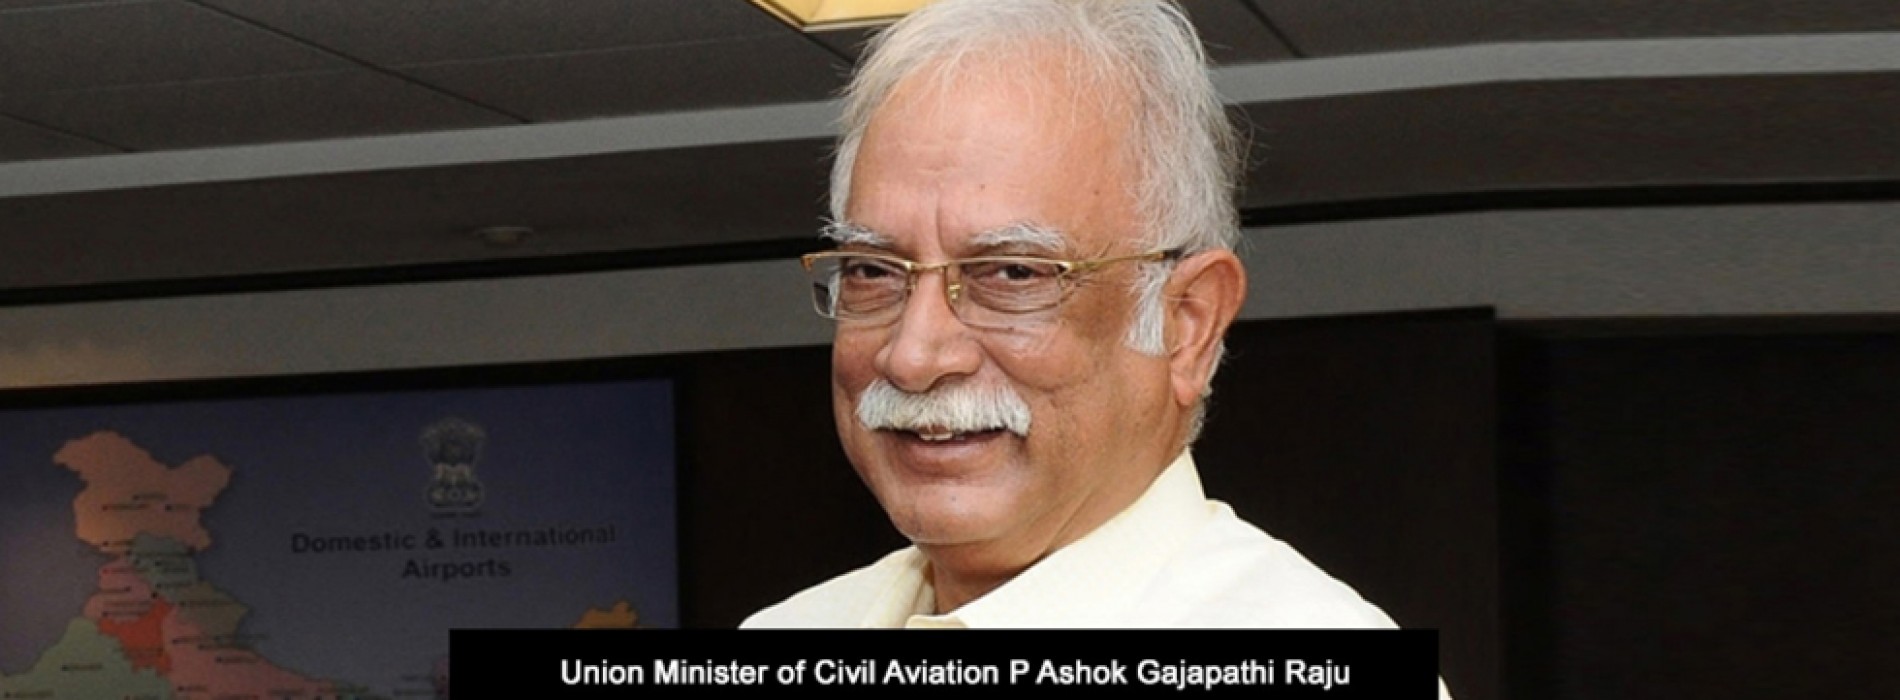 9 proposals to change airport names being considered: Raju